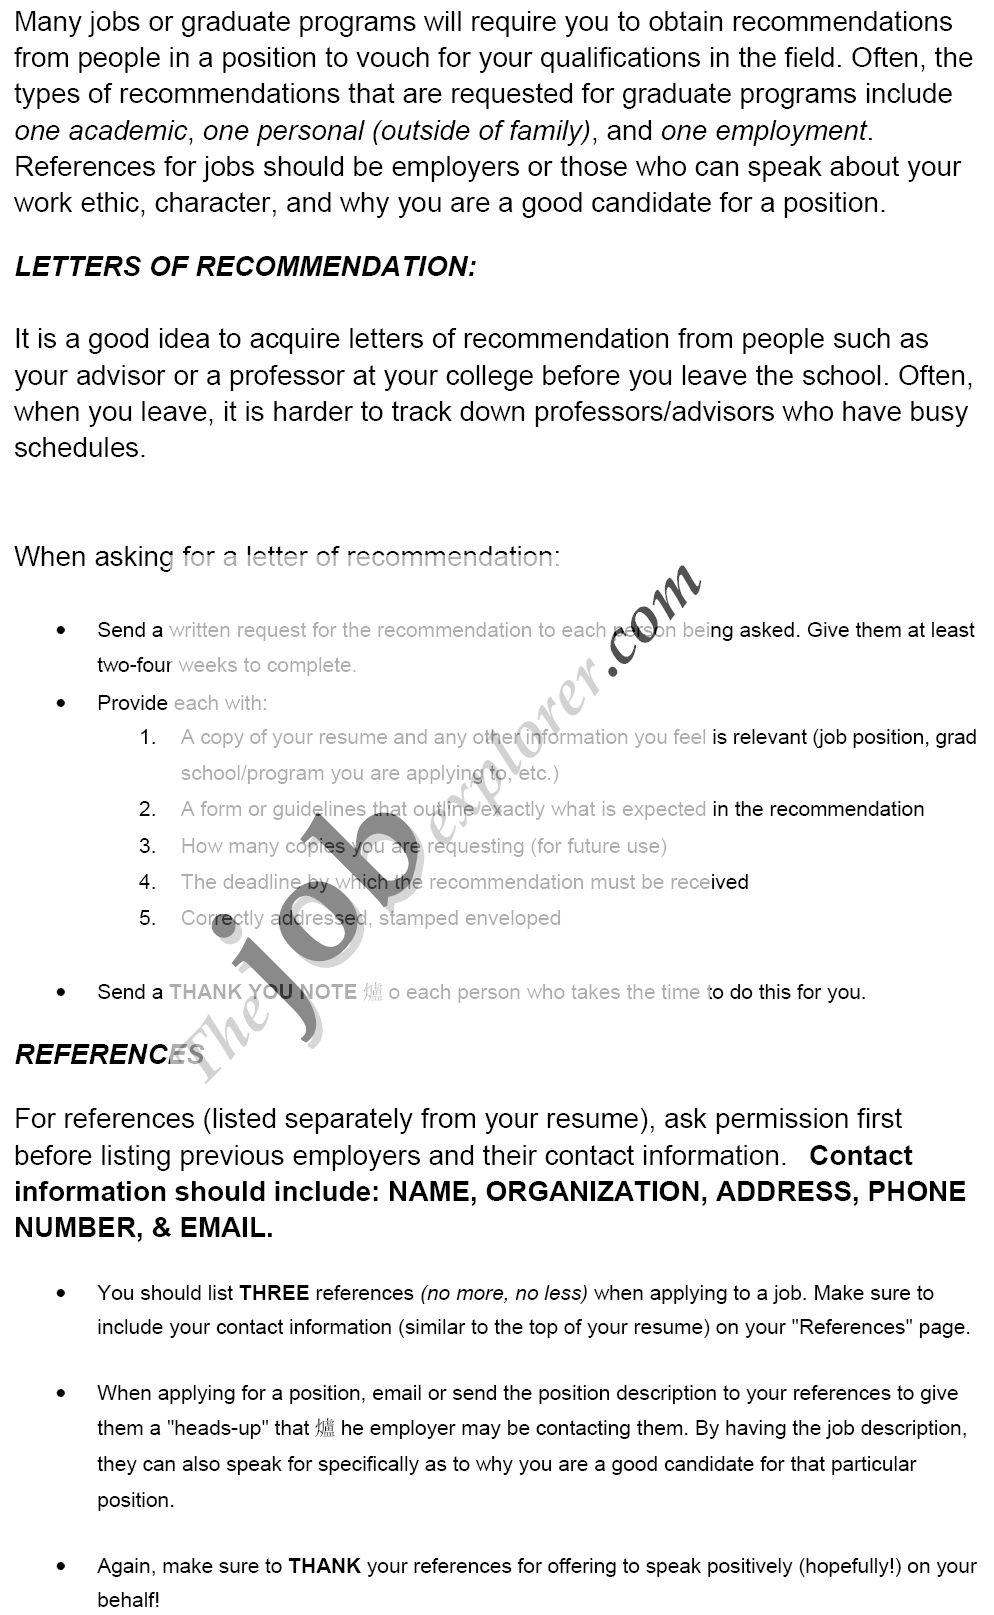 Letter Of Recommendation For Employment Samples from www.thejobexplorer.com